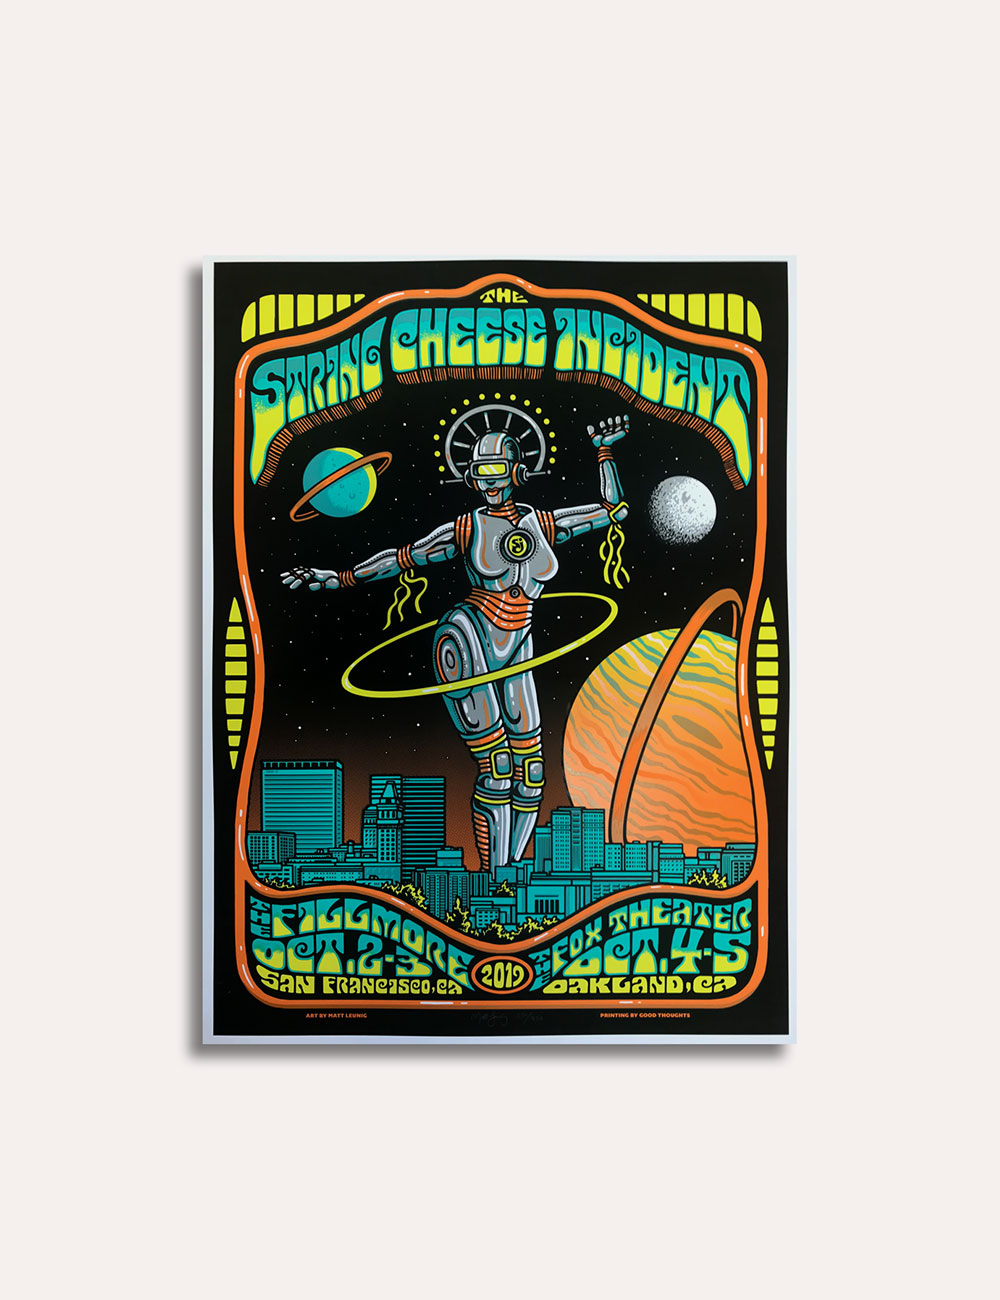 The String Cheese Incident - Merch - Poster - 2019 San Francisco and Oakland Shows